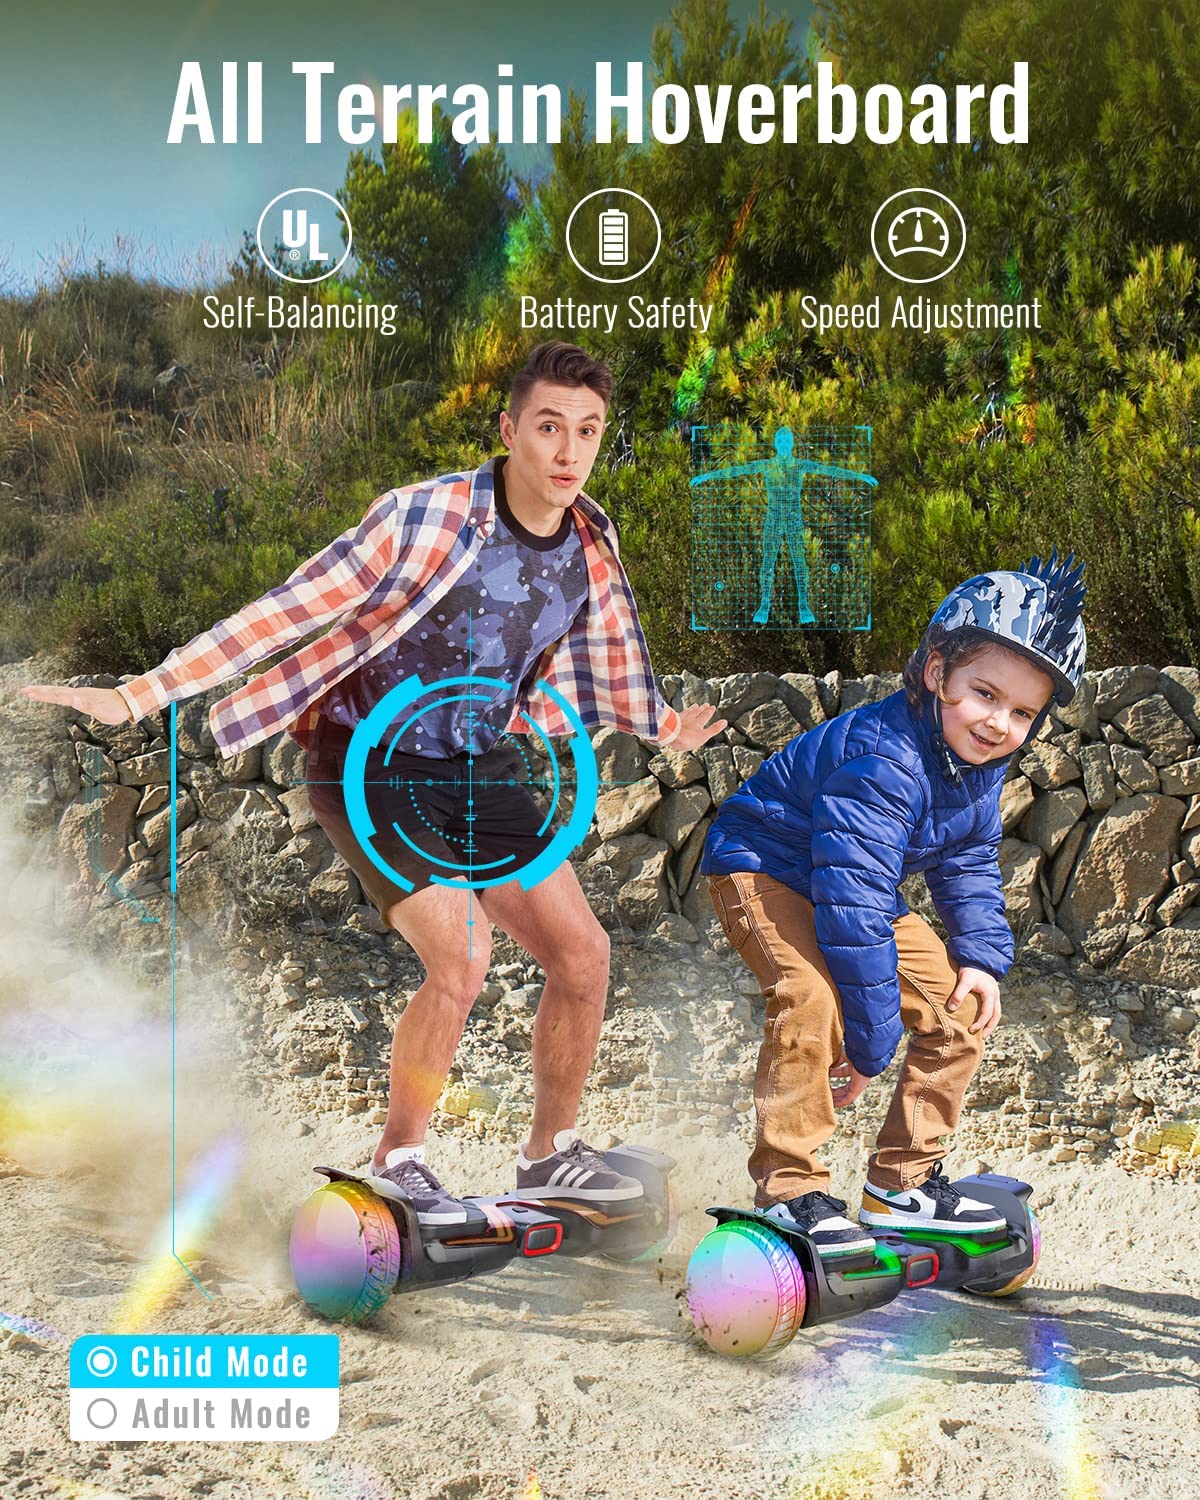 Hoverboard with Bluetooth and LED lights - off road hoverboard - 6.5 inch hoverboard - Gyroor Y1 hoverboard (1)